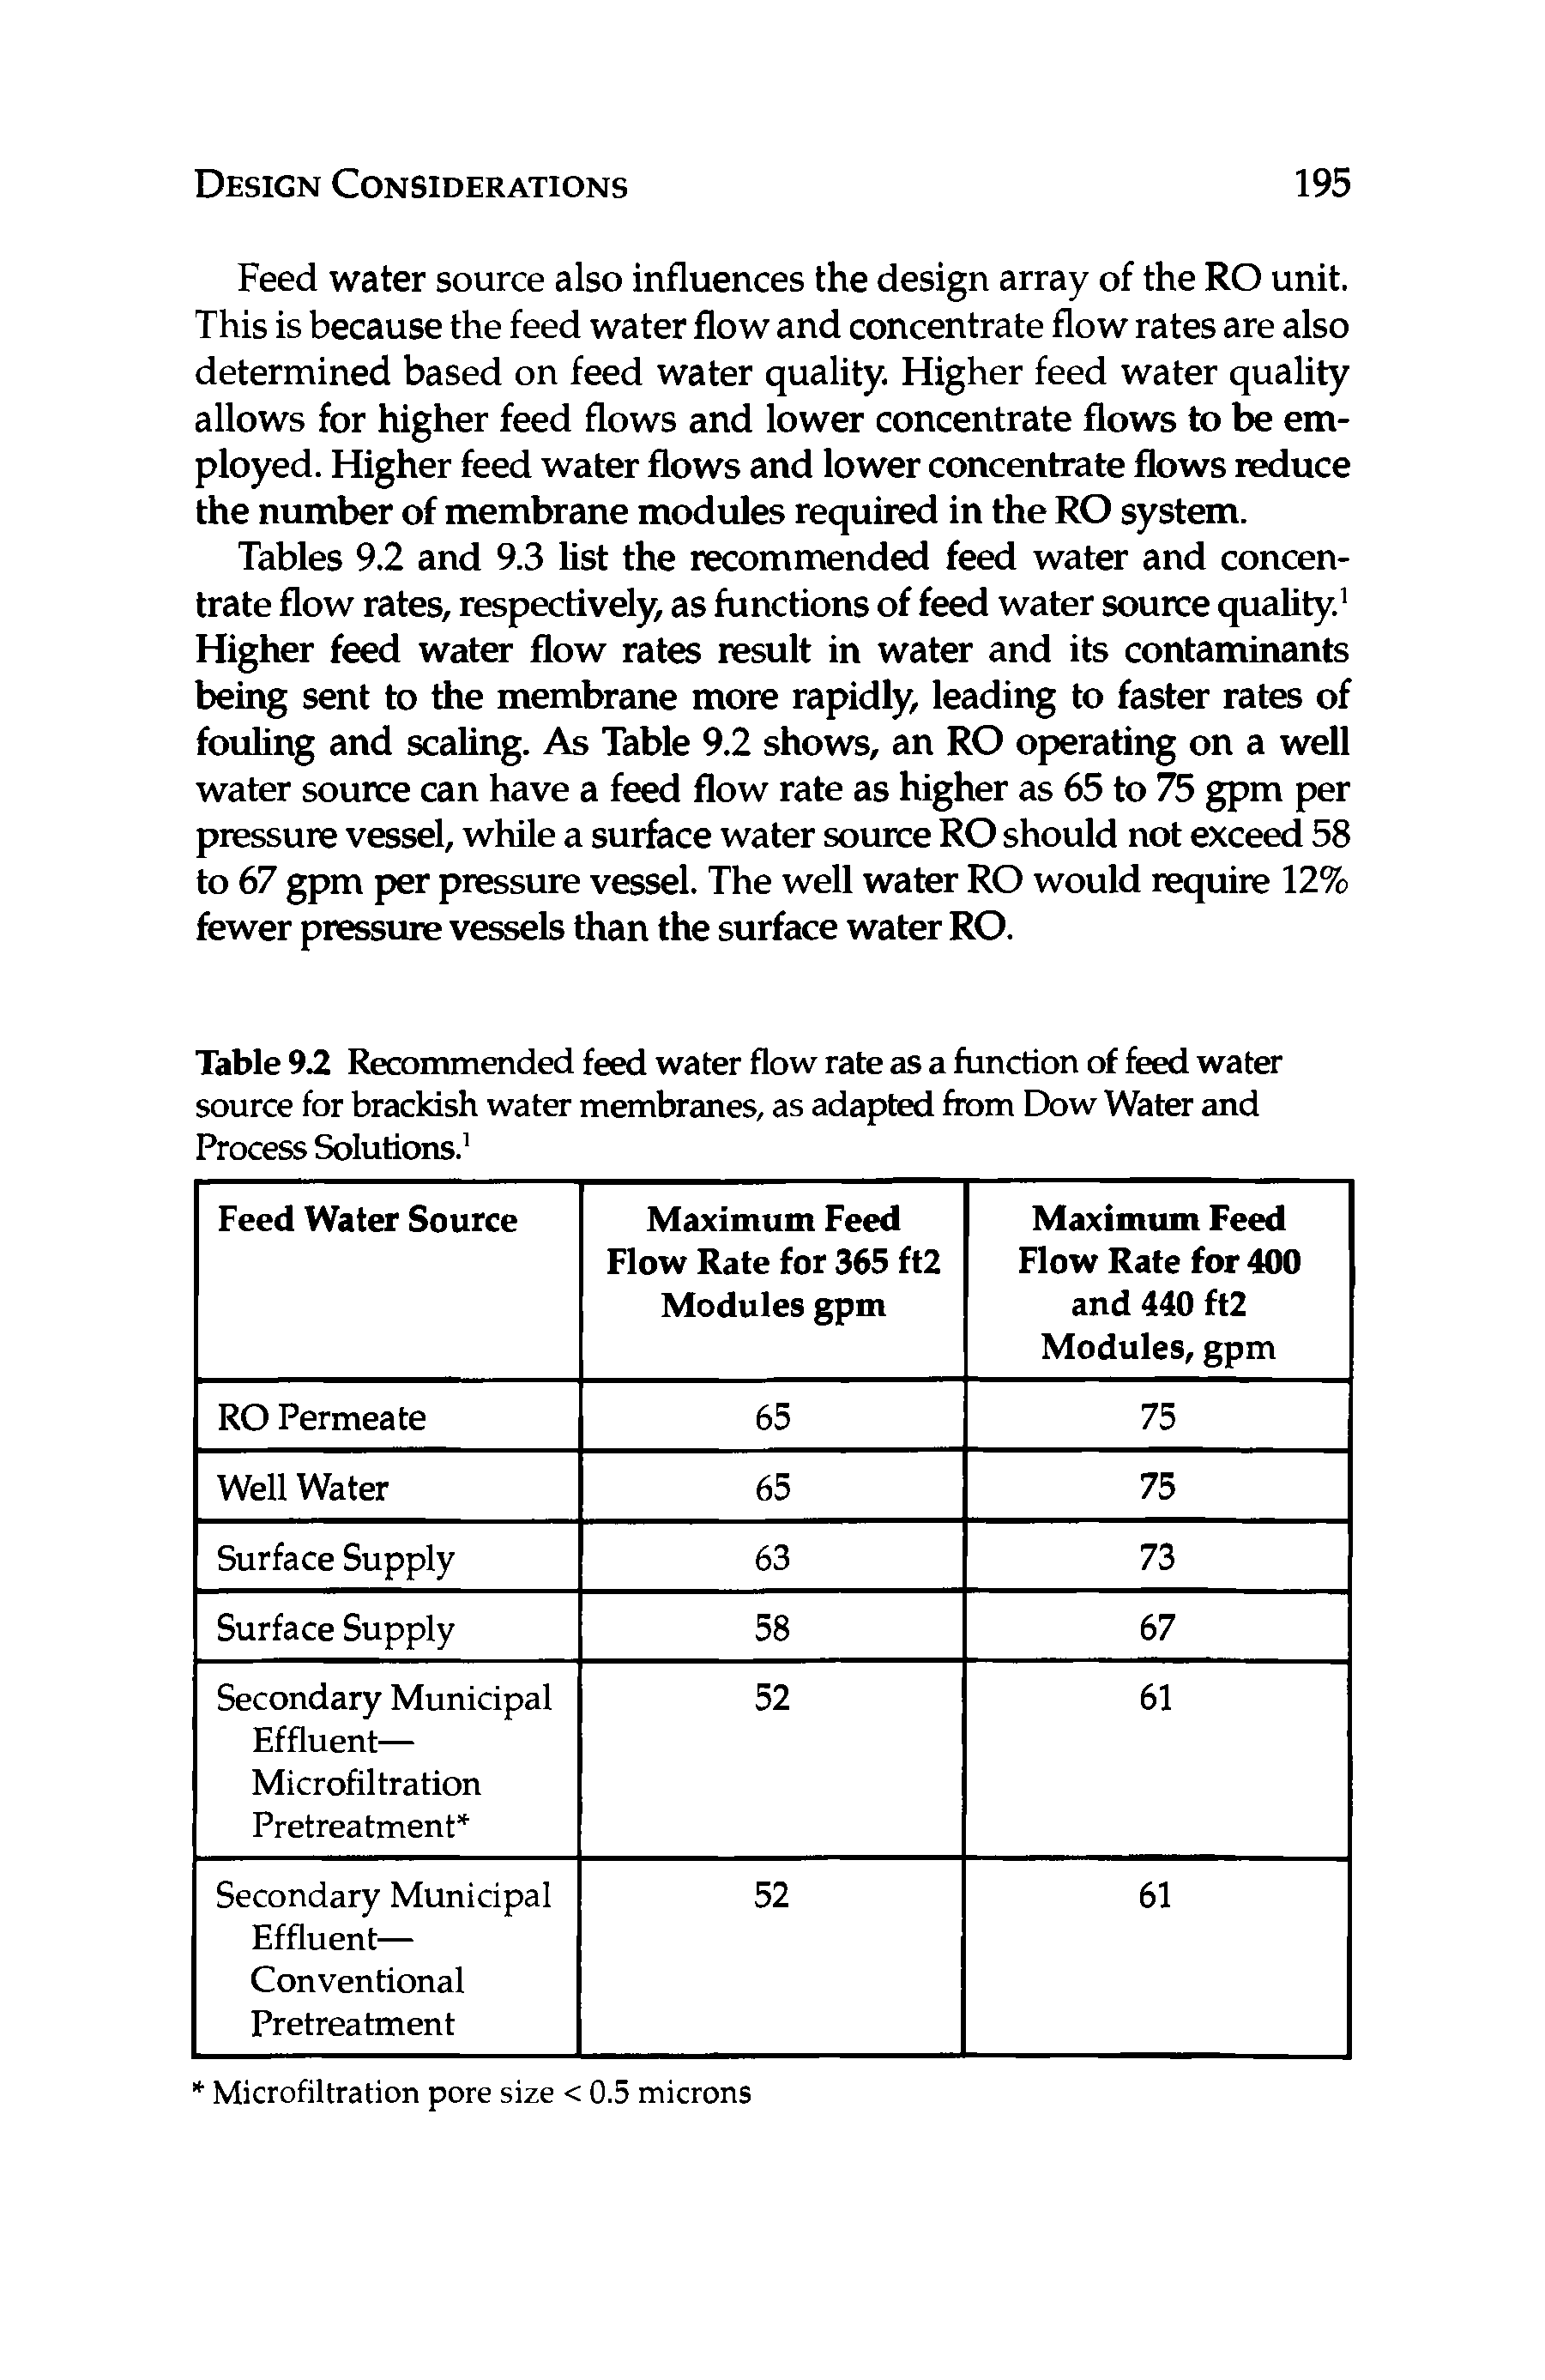 Tables 9.2 and 9.3 list the recommended feed water and concentrate flow rates, respectively, as functions of feed water source quality.1 Higher feed water flow rates result in water and its contaminants being sent to the membrane more rapidly, leading to faster rates of fouling and scaling. As Table 9.2 shows, an RO operating on a well water source can have a feed flow rate as higher as 65 to 75 gpm per pressure vessel, while a surface water source RO should not exceed 58 to 67 gpm per pressure vessel. The well water RO would require 12% fewer pressure vessels than the surface water RO.